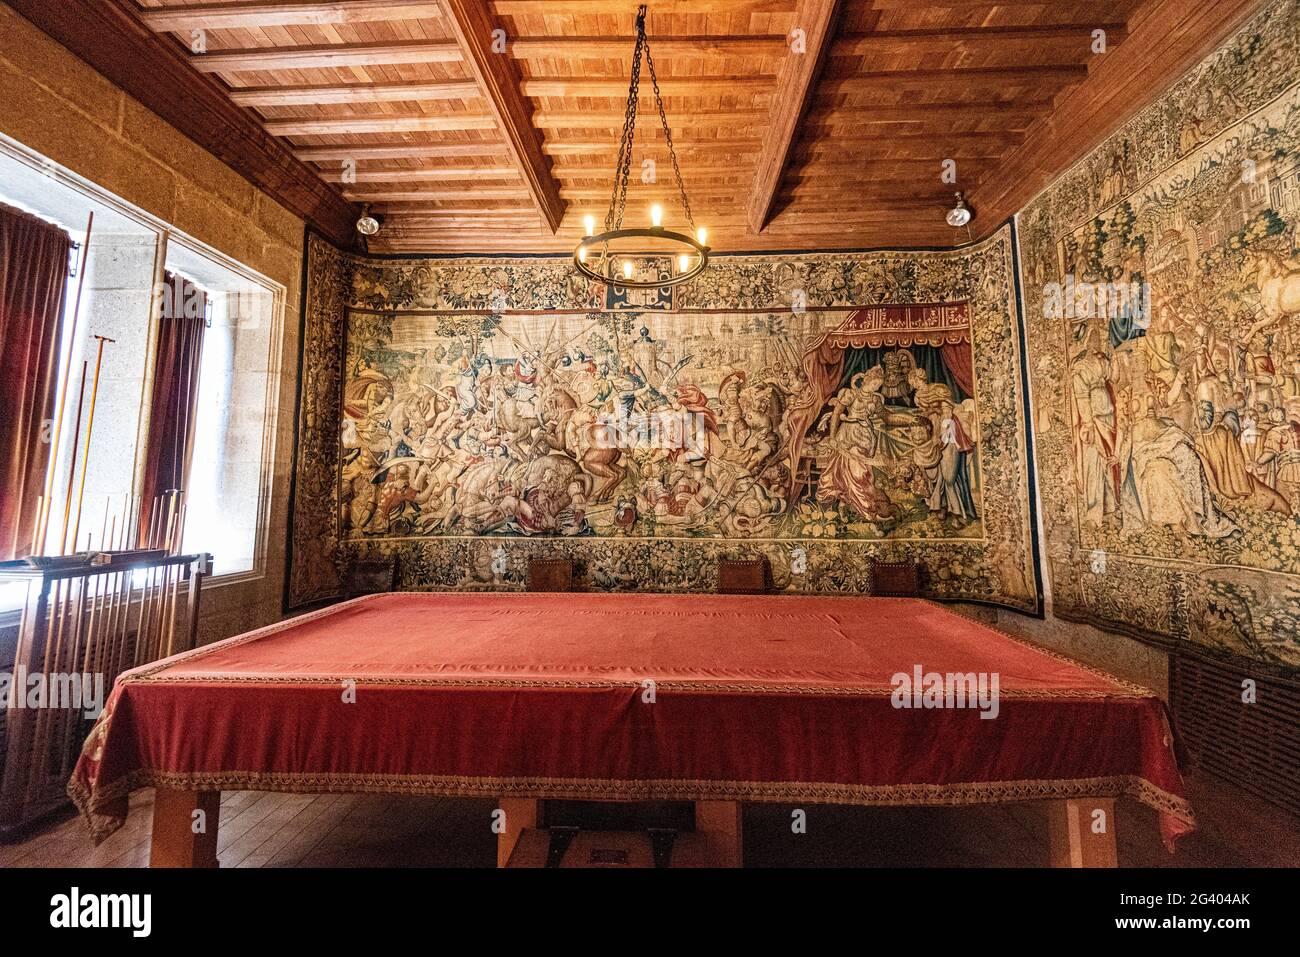 Old billiard table covered in a room lined with tapestries, Castle Drogo, Dartmoor, Devon, Stock Photo